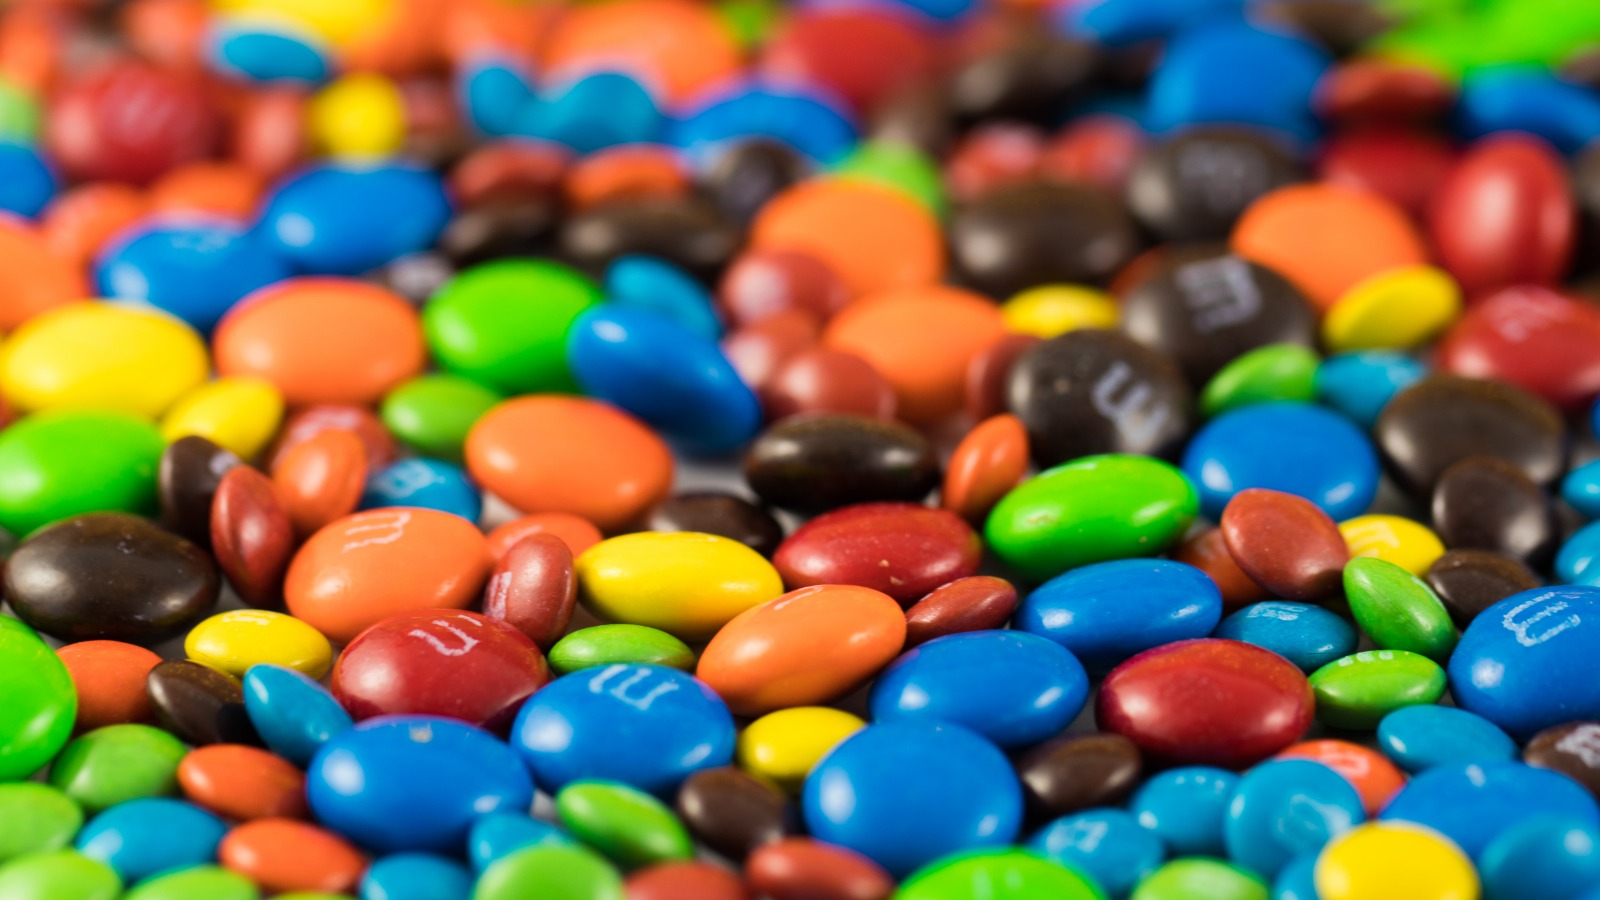 These are what m&m's looked like before blue replaced tan in a